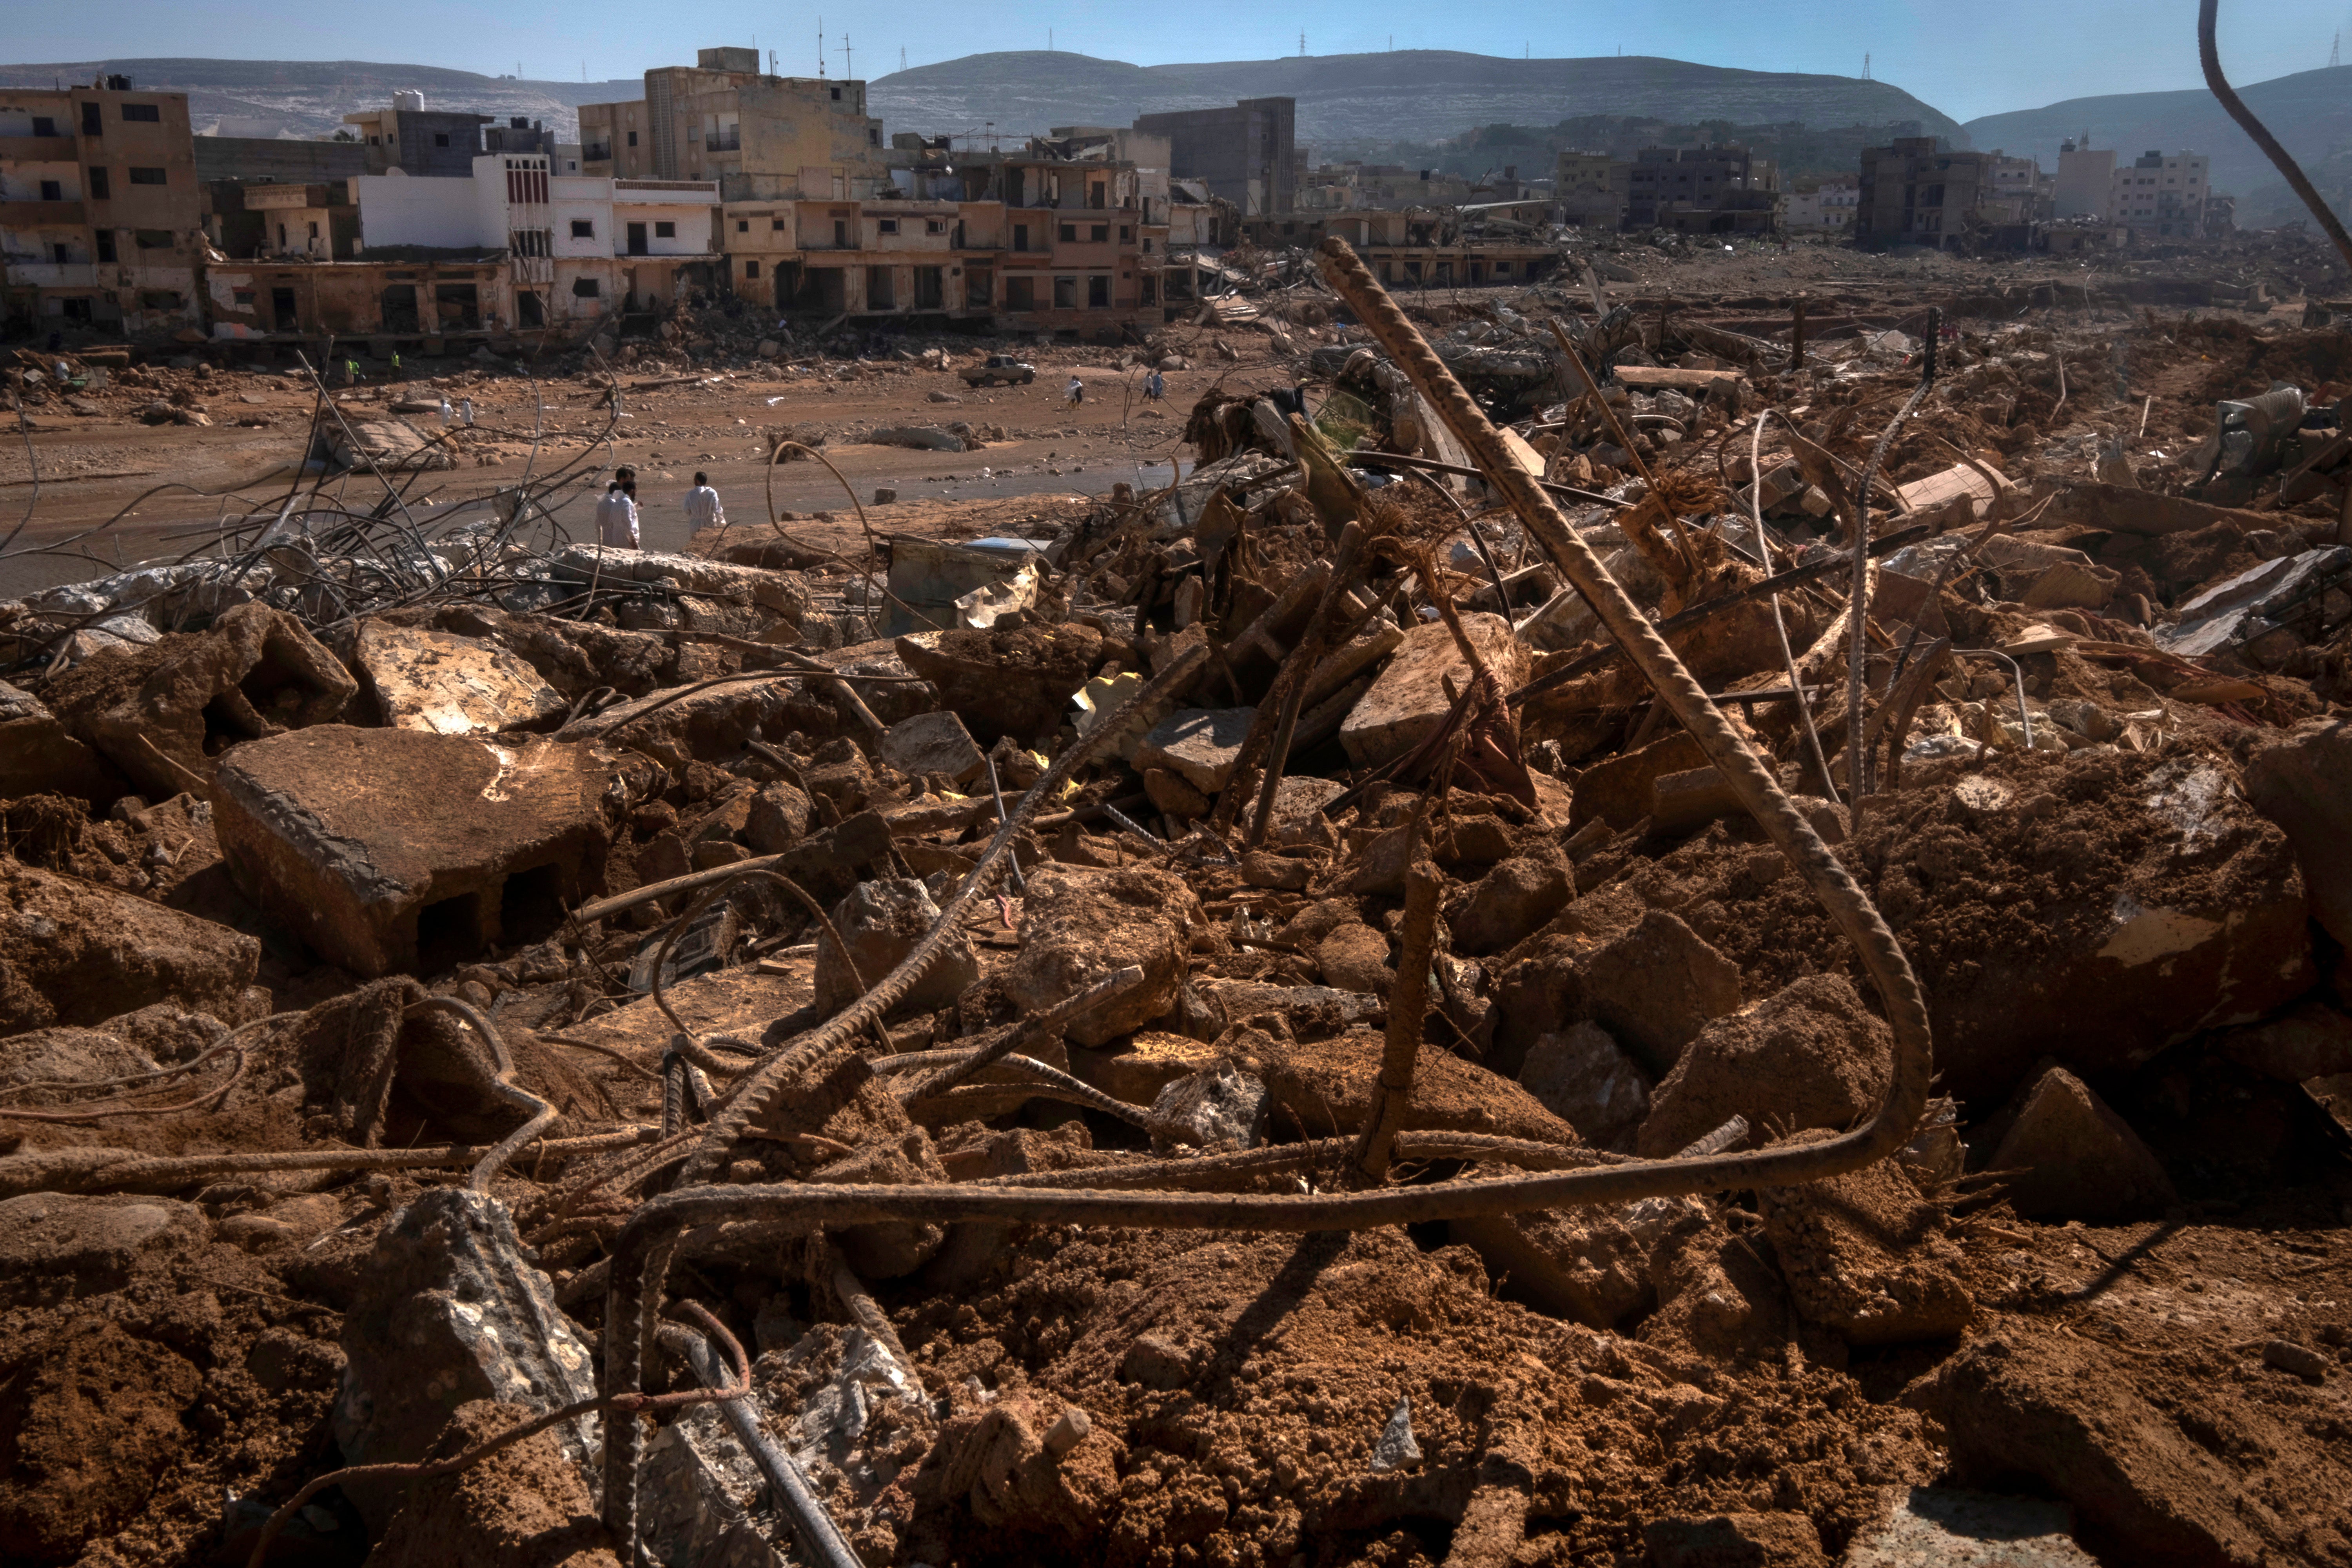 A view of the destruction after flooding in Derna